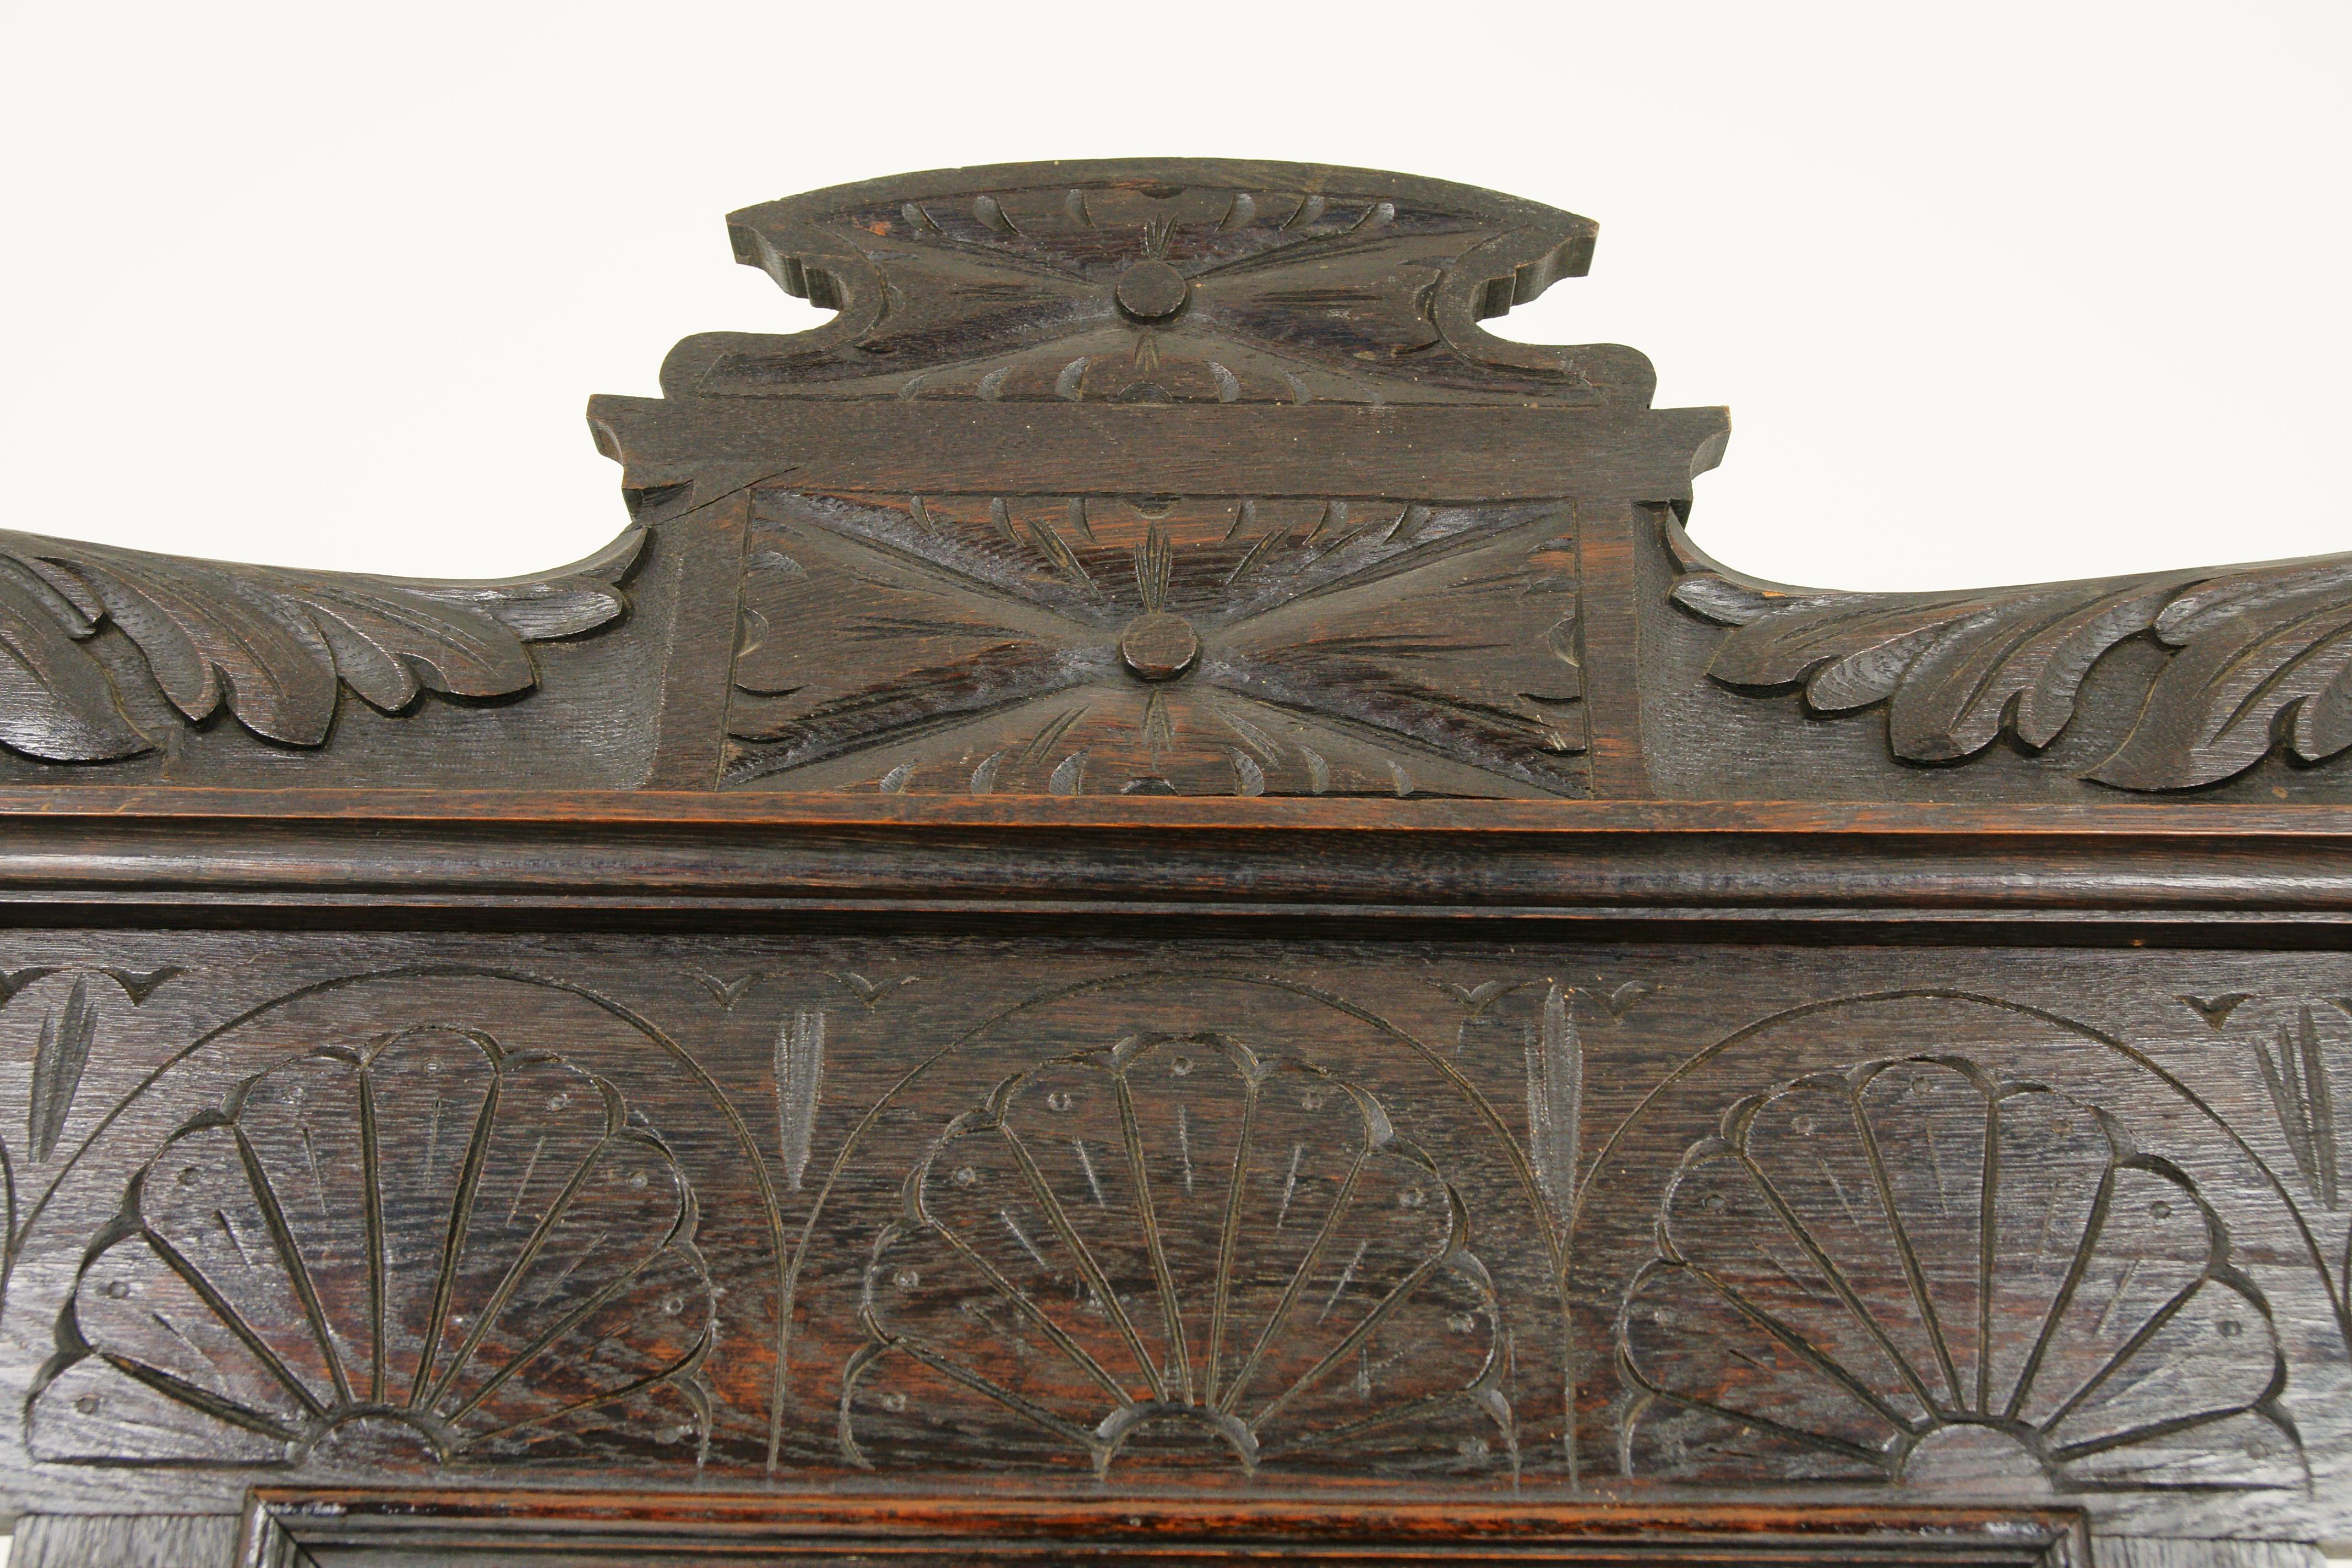 Antique hall stand, hat rack, coat rack, green man motif, Victorian, Scotland 1880, H054

Scotland, 1880
solid oak construction with original finish
carved pediment to the top
carved panel below
original rectangular mirror with some crazing
9 wooden